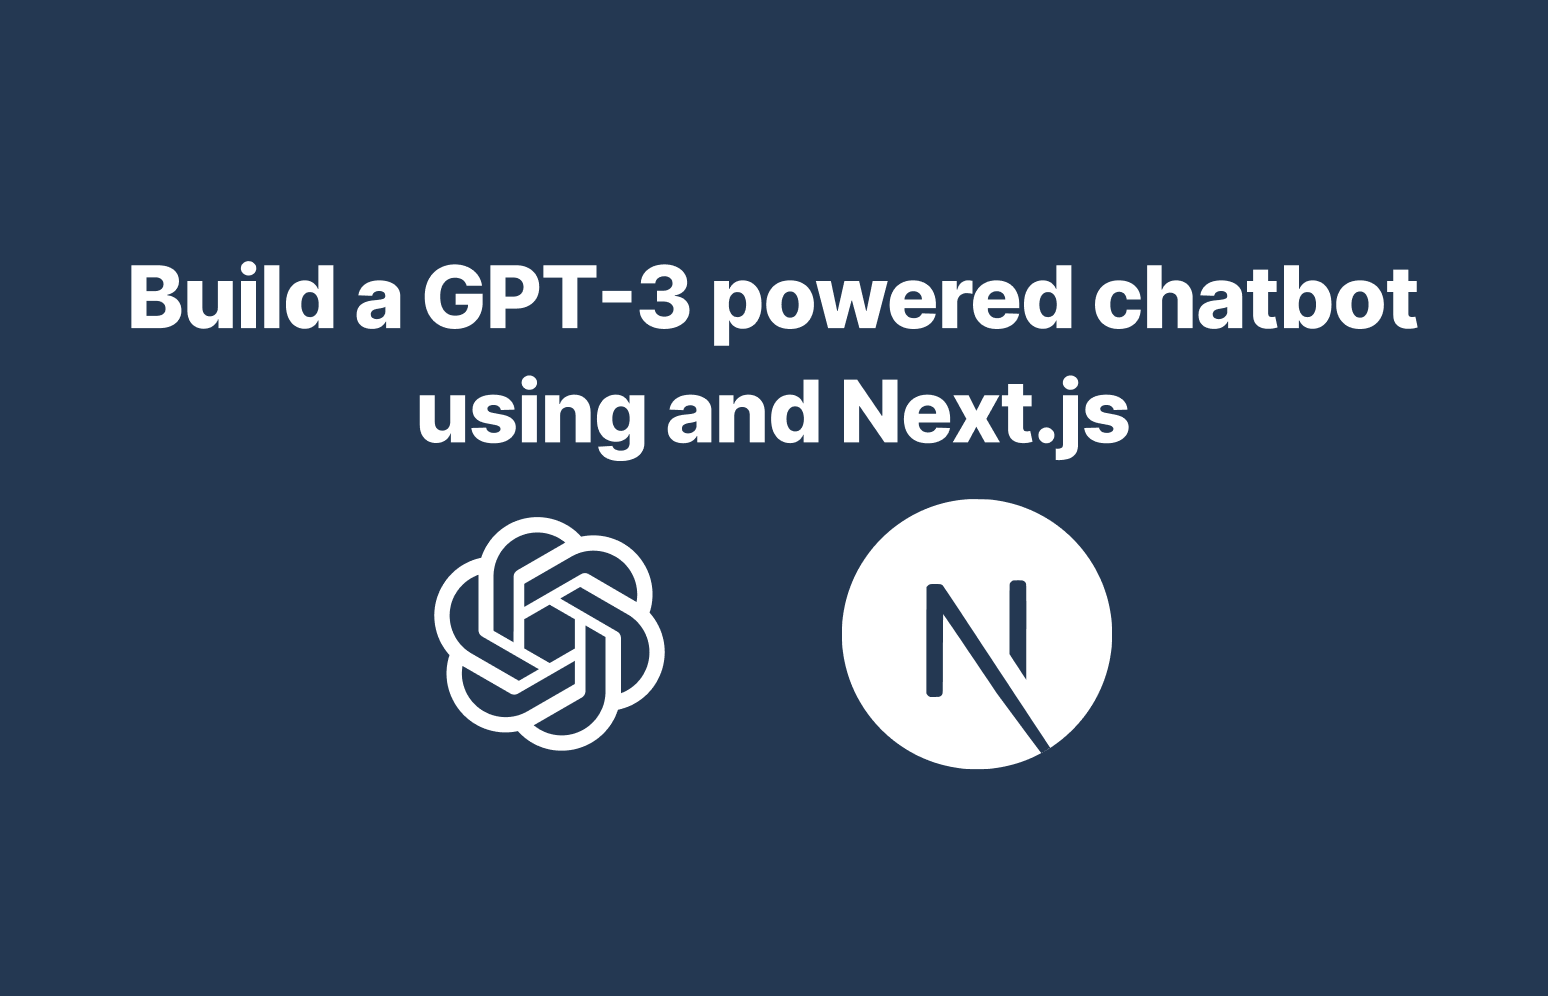 How to build a GPT-3 powered chatbot in Next.js